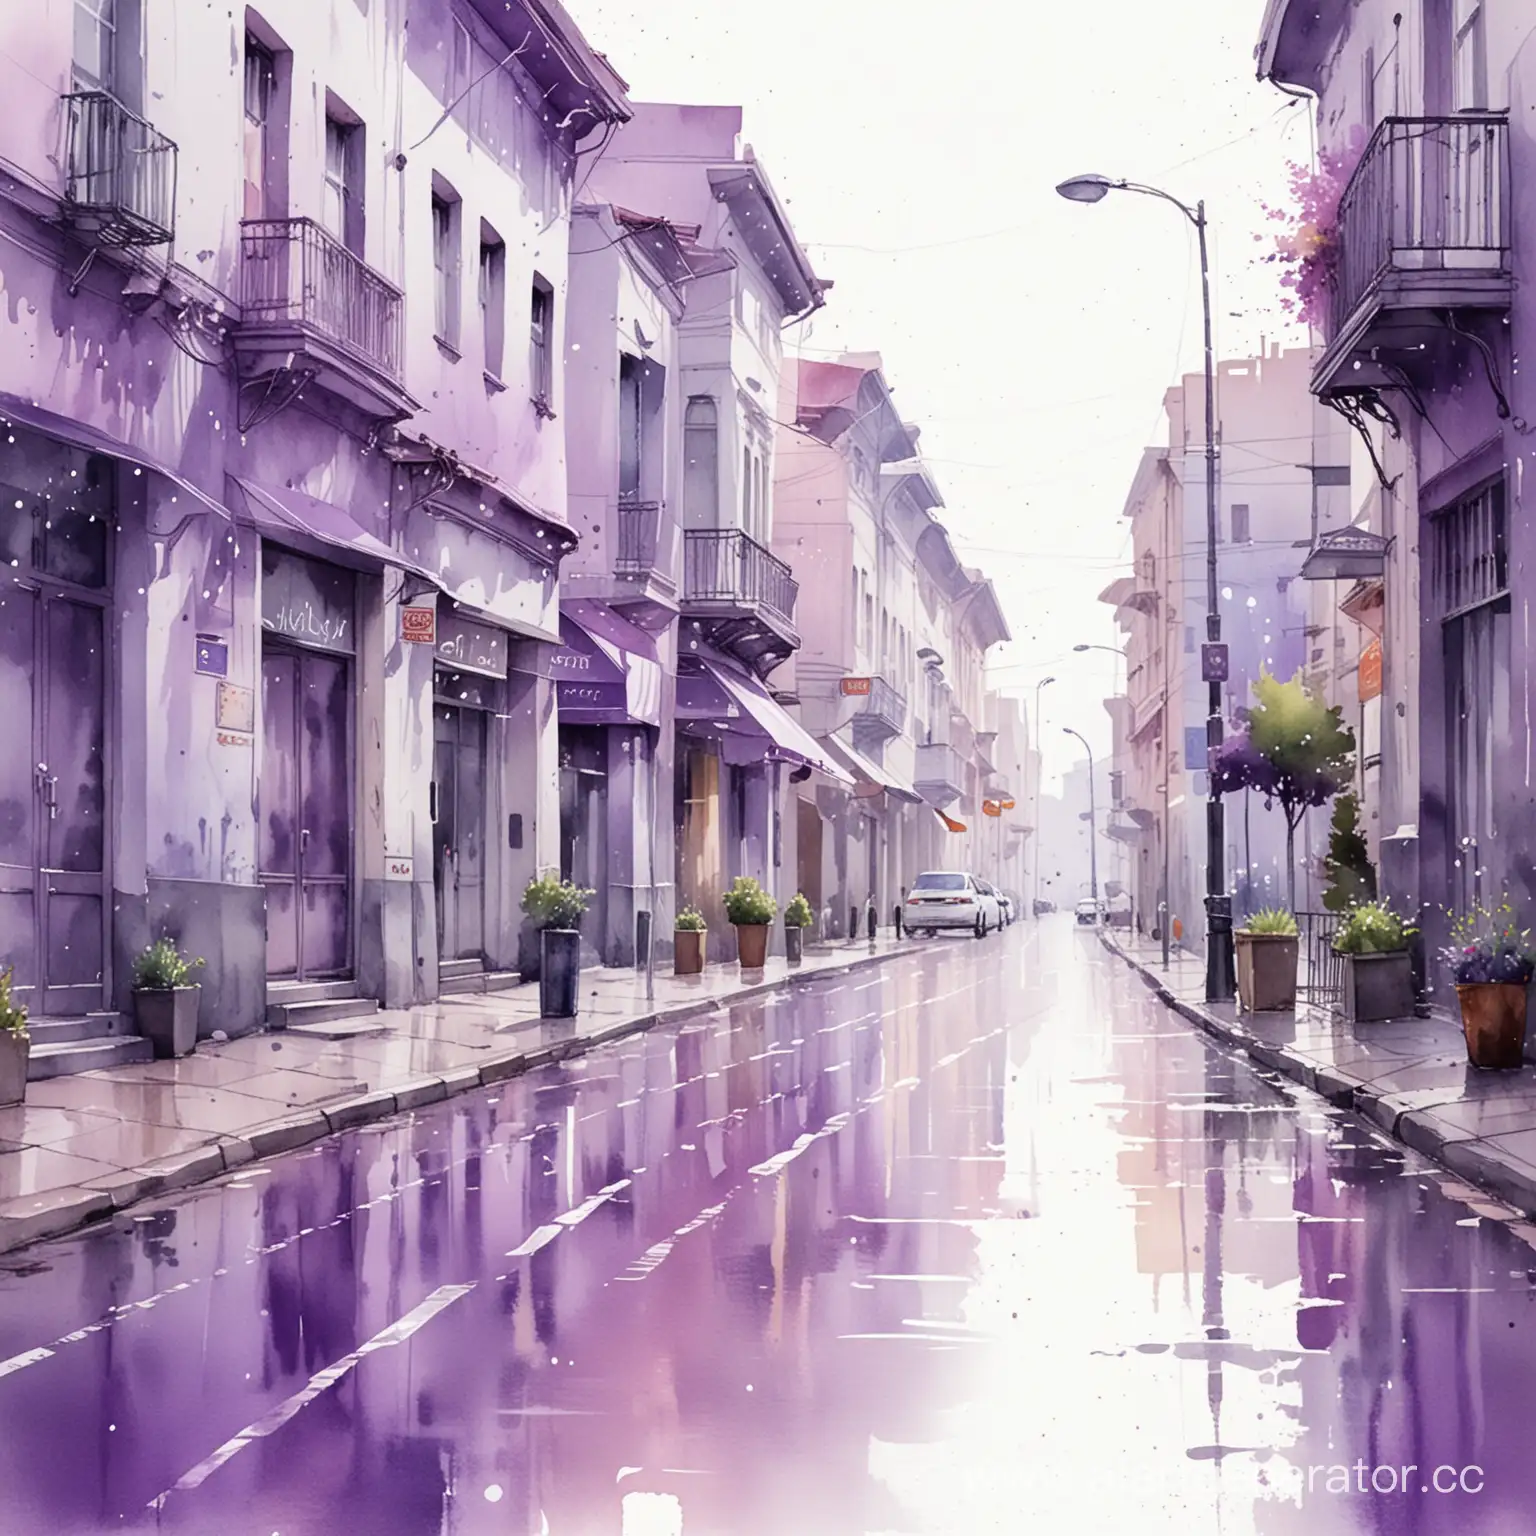 Summer-Rain-on-Panorama-City-Street-Airy-Watercolor-in-Purple-Delicate-Shades